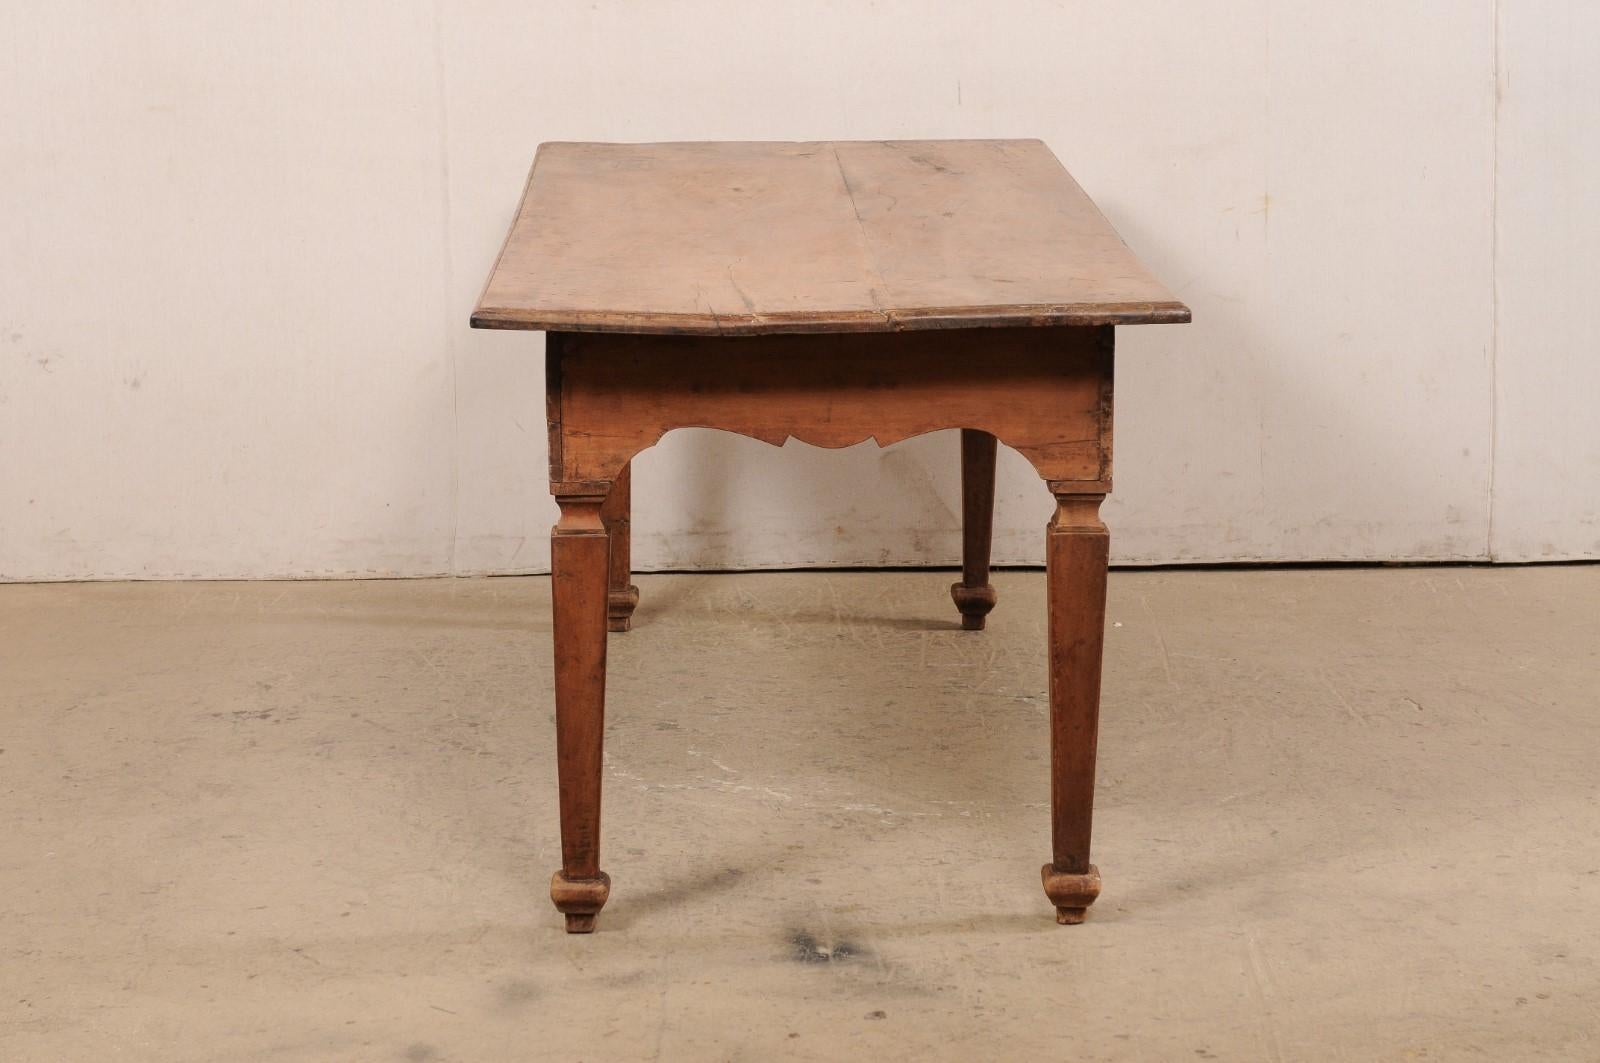 A Late 18th C. Italian Walnut Farm Table with Carved Skirt, 6 Ft Long For Sale 1